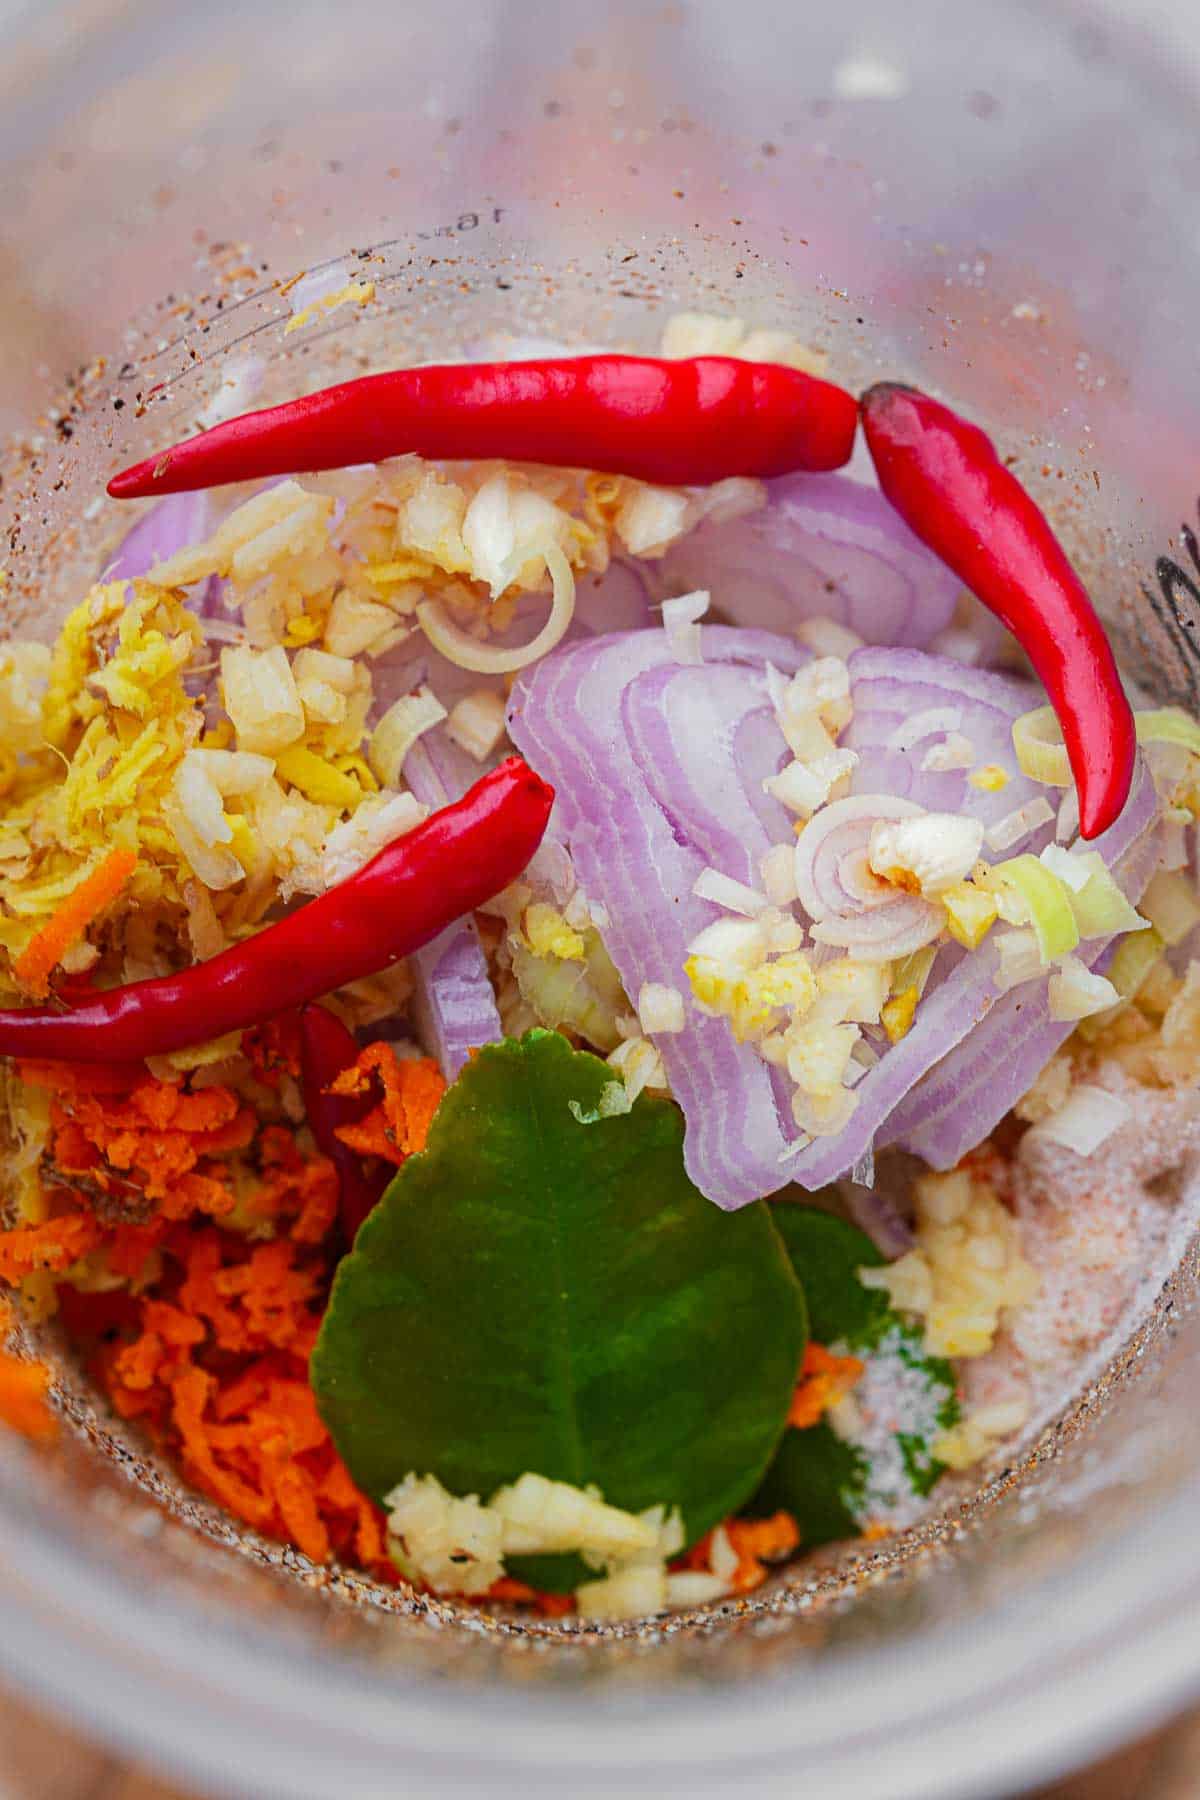 A blender filled with vegetables and spices.